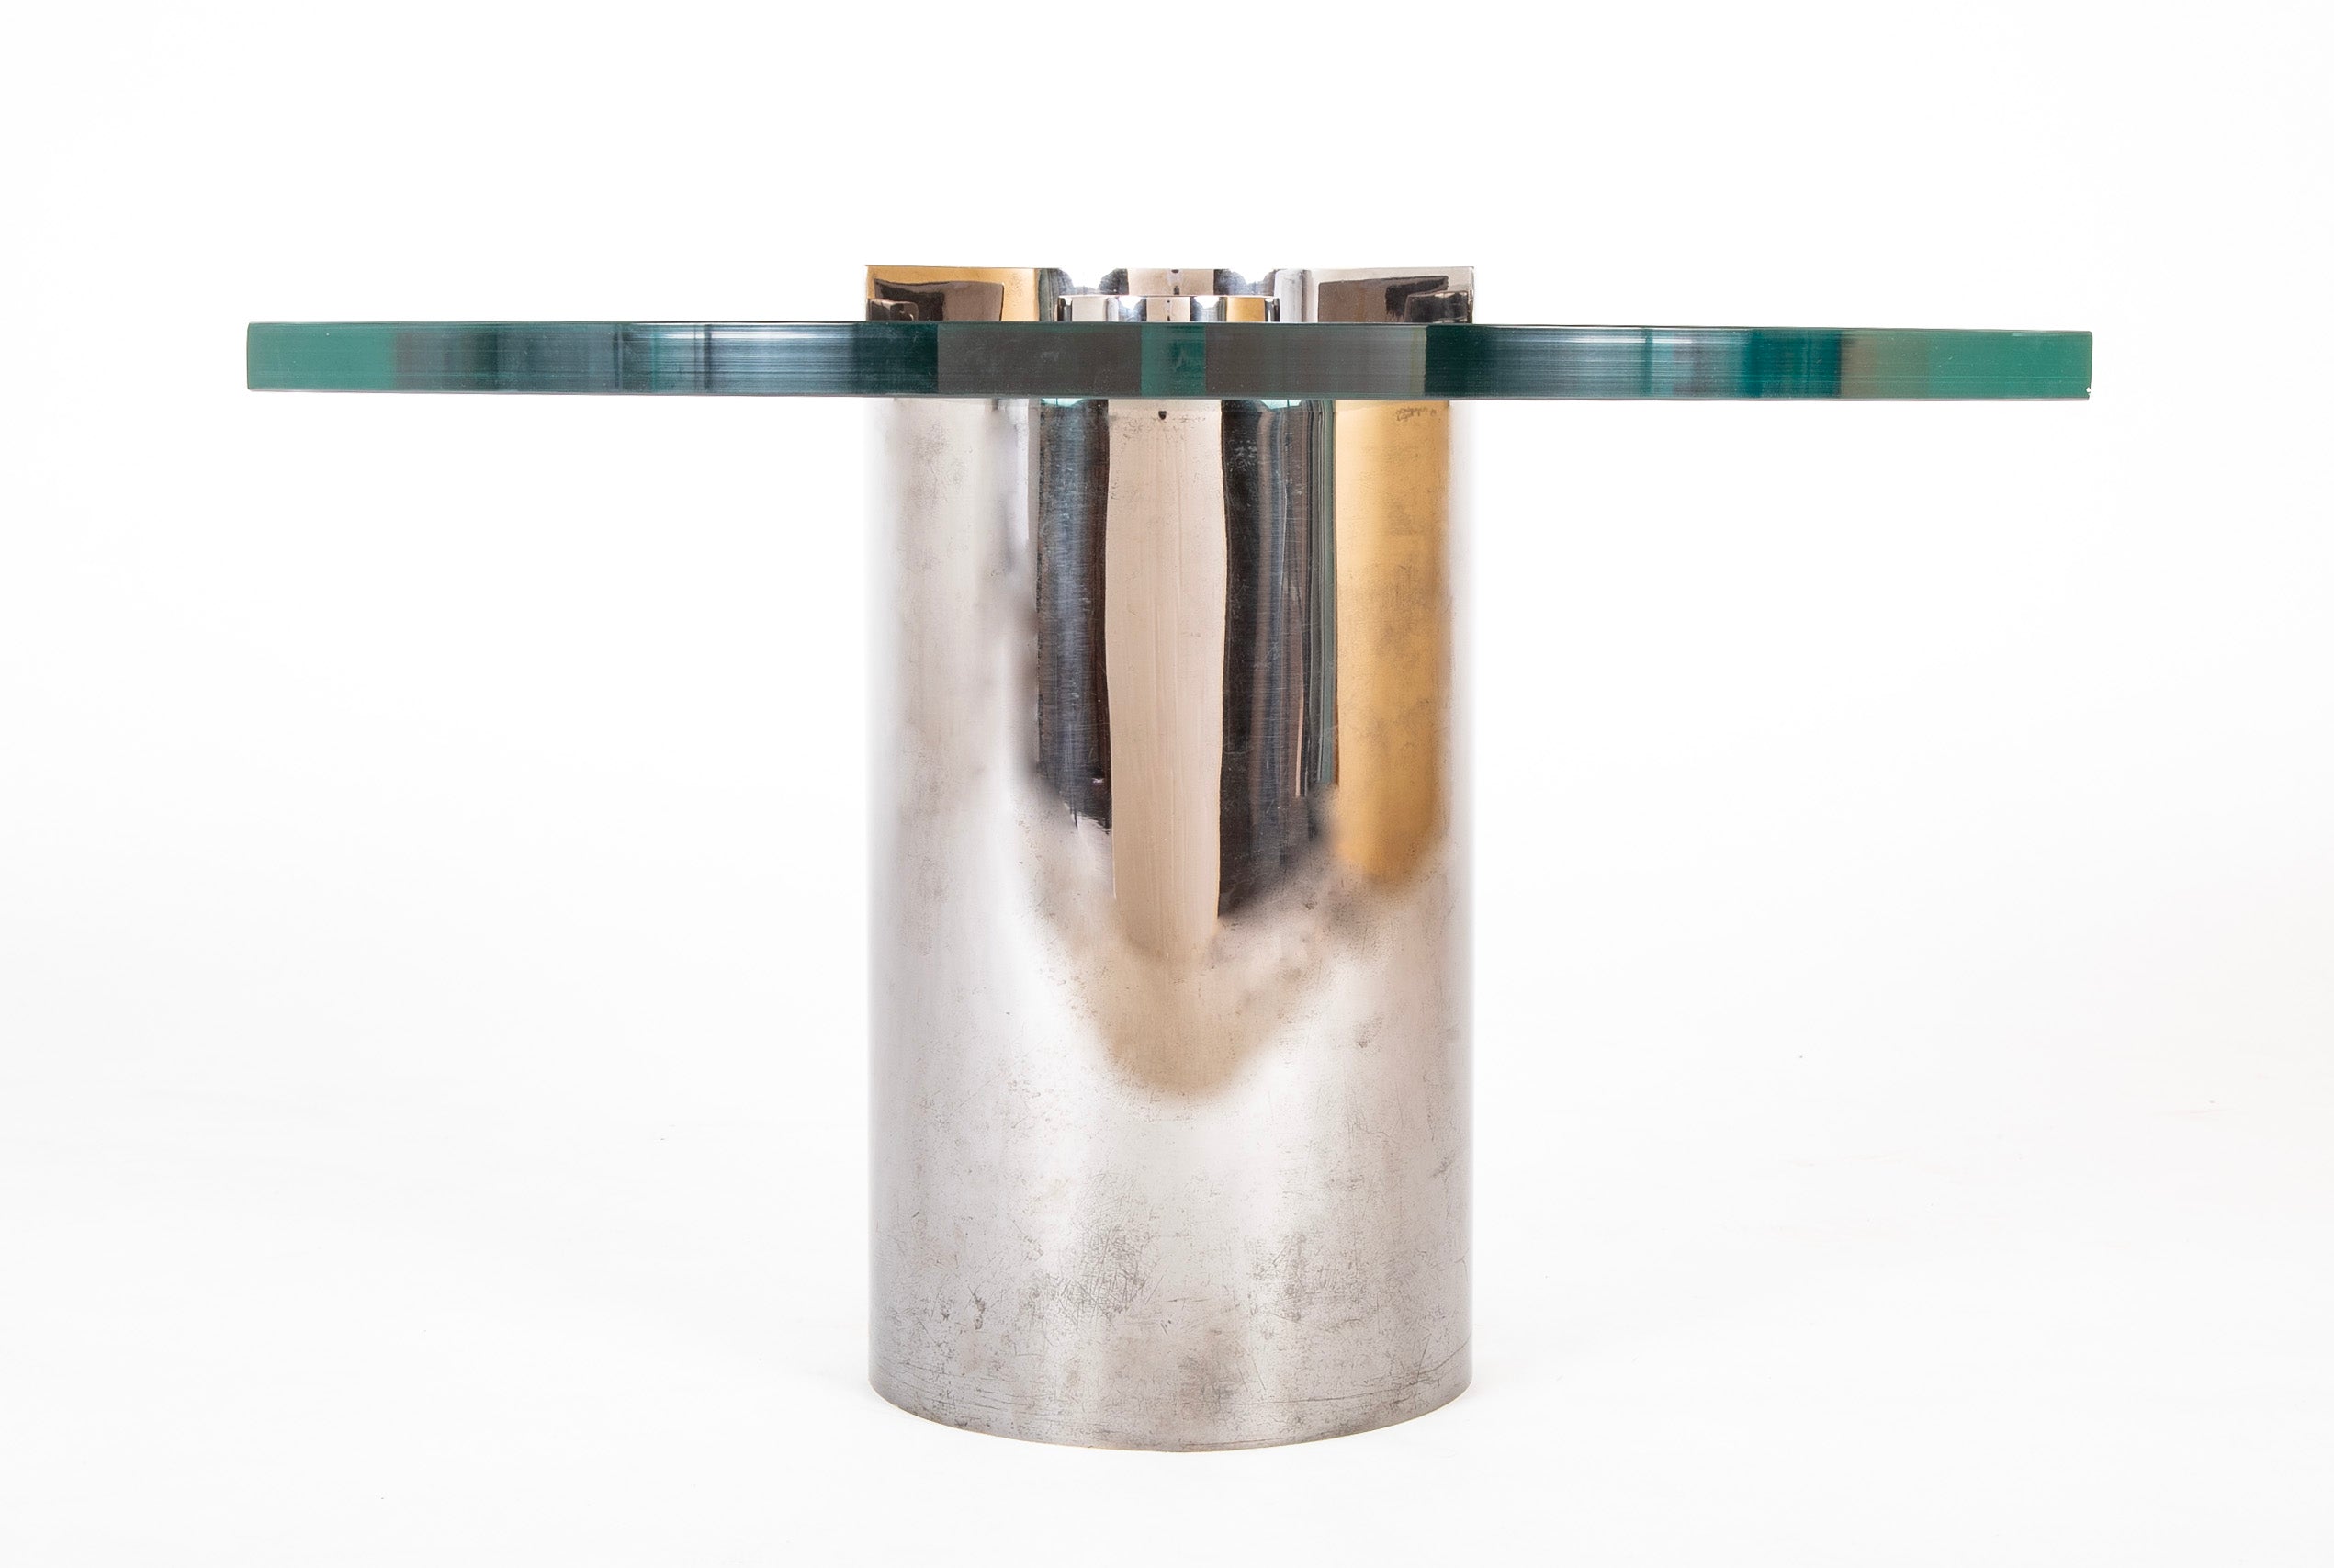 Signed Karl Springer Side Table with Cantilevered Glass Top